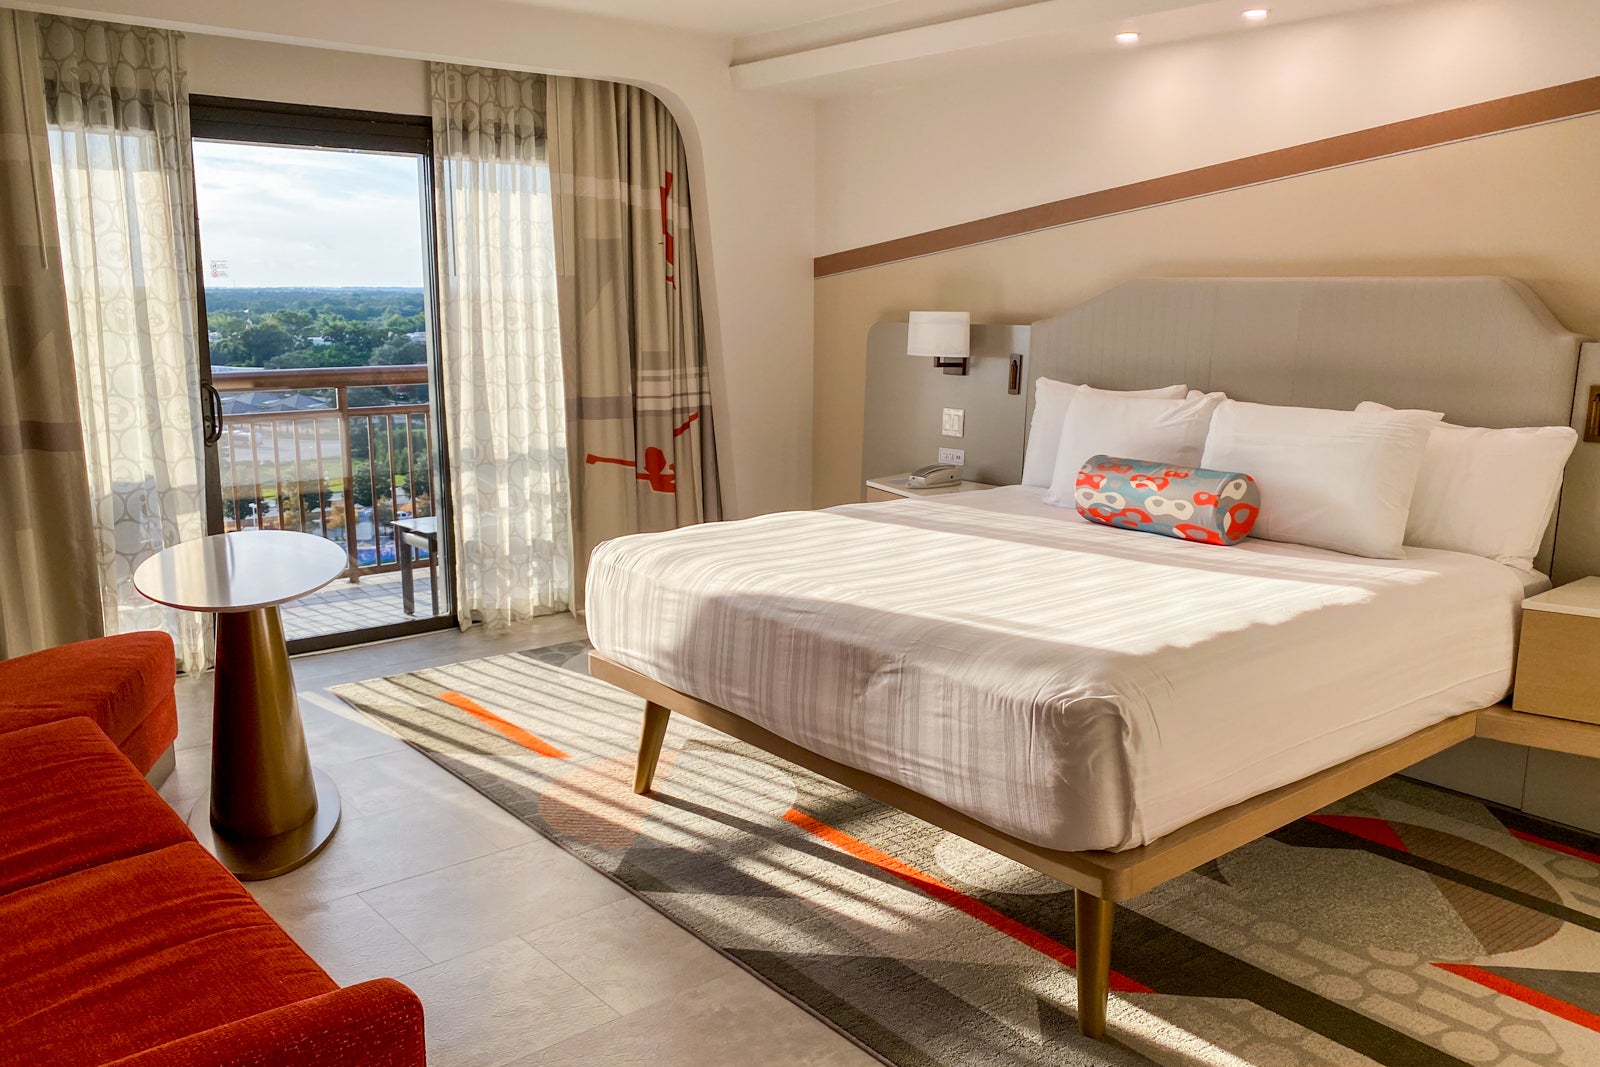 First look: Disney's Contemporary Resort guest rooms get a makeover